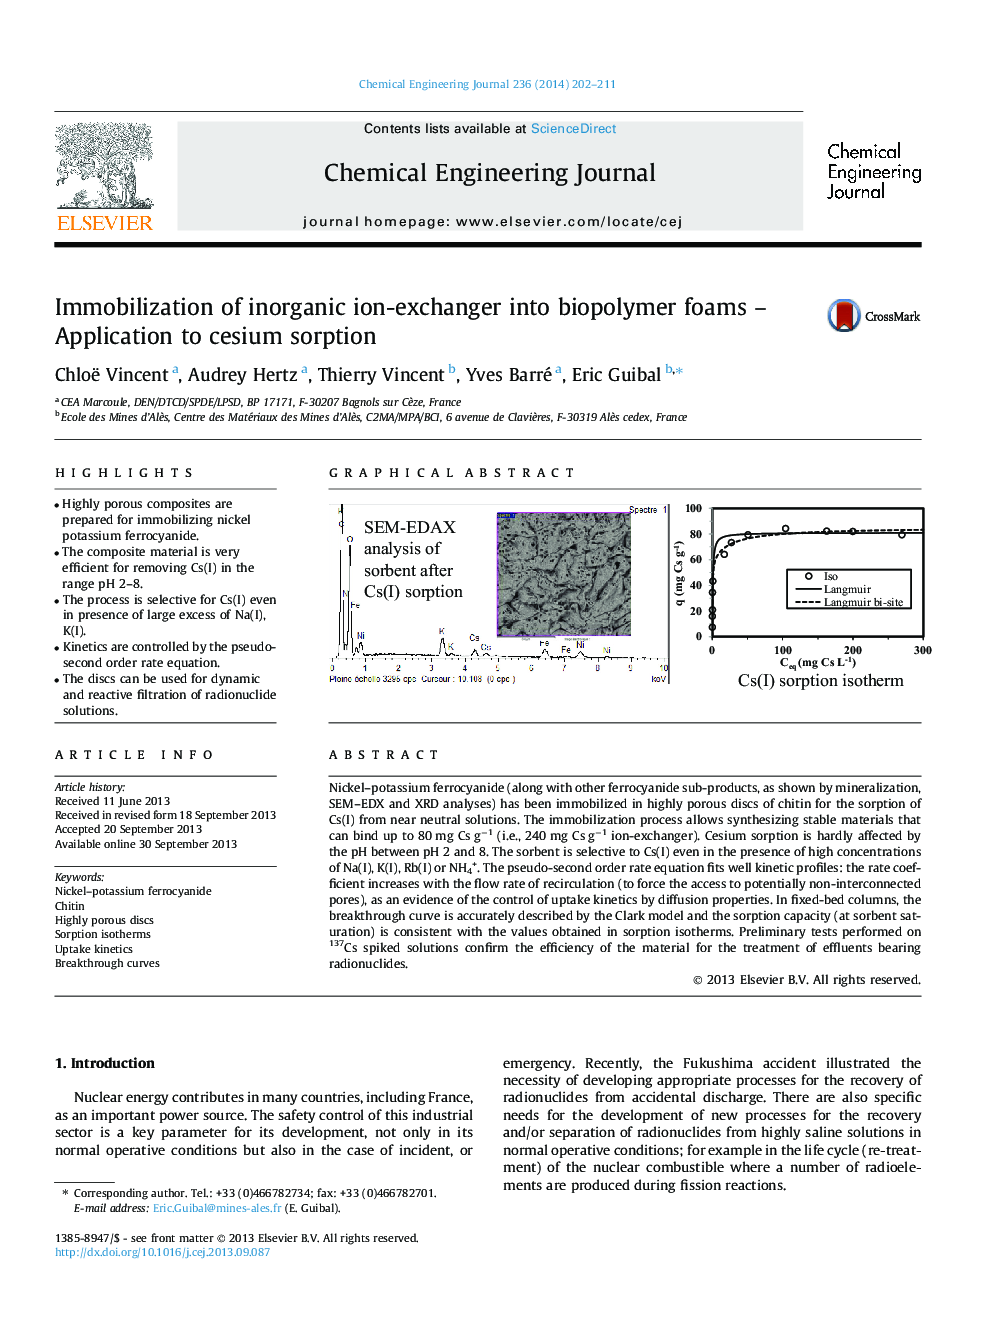 Immobilization of inorganic ion-exchanger into biopolymer foams – Application to cesium sorption